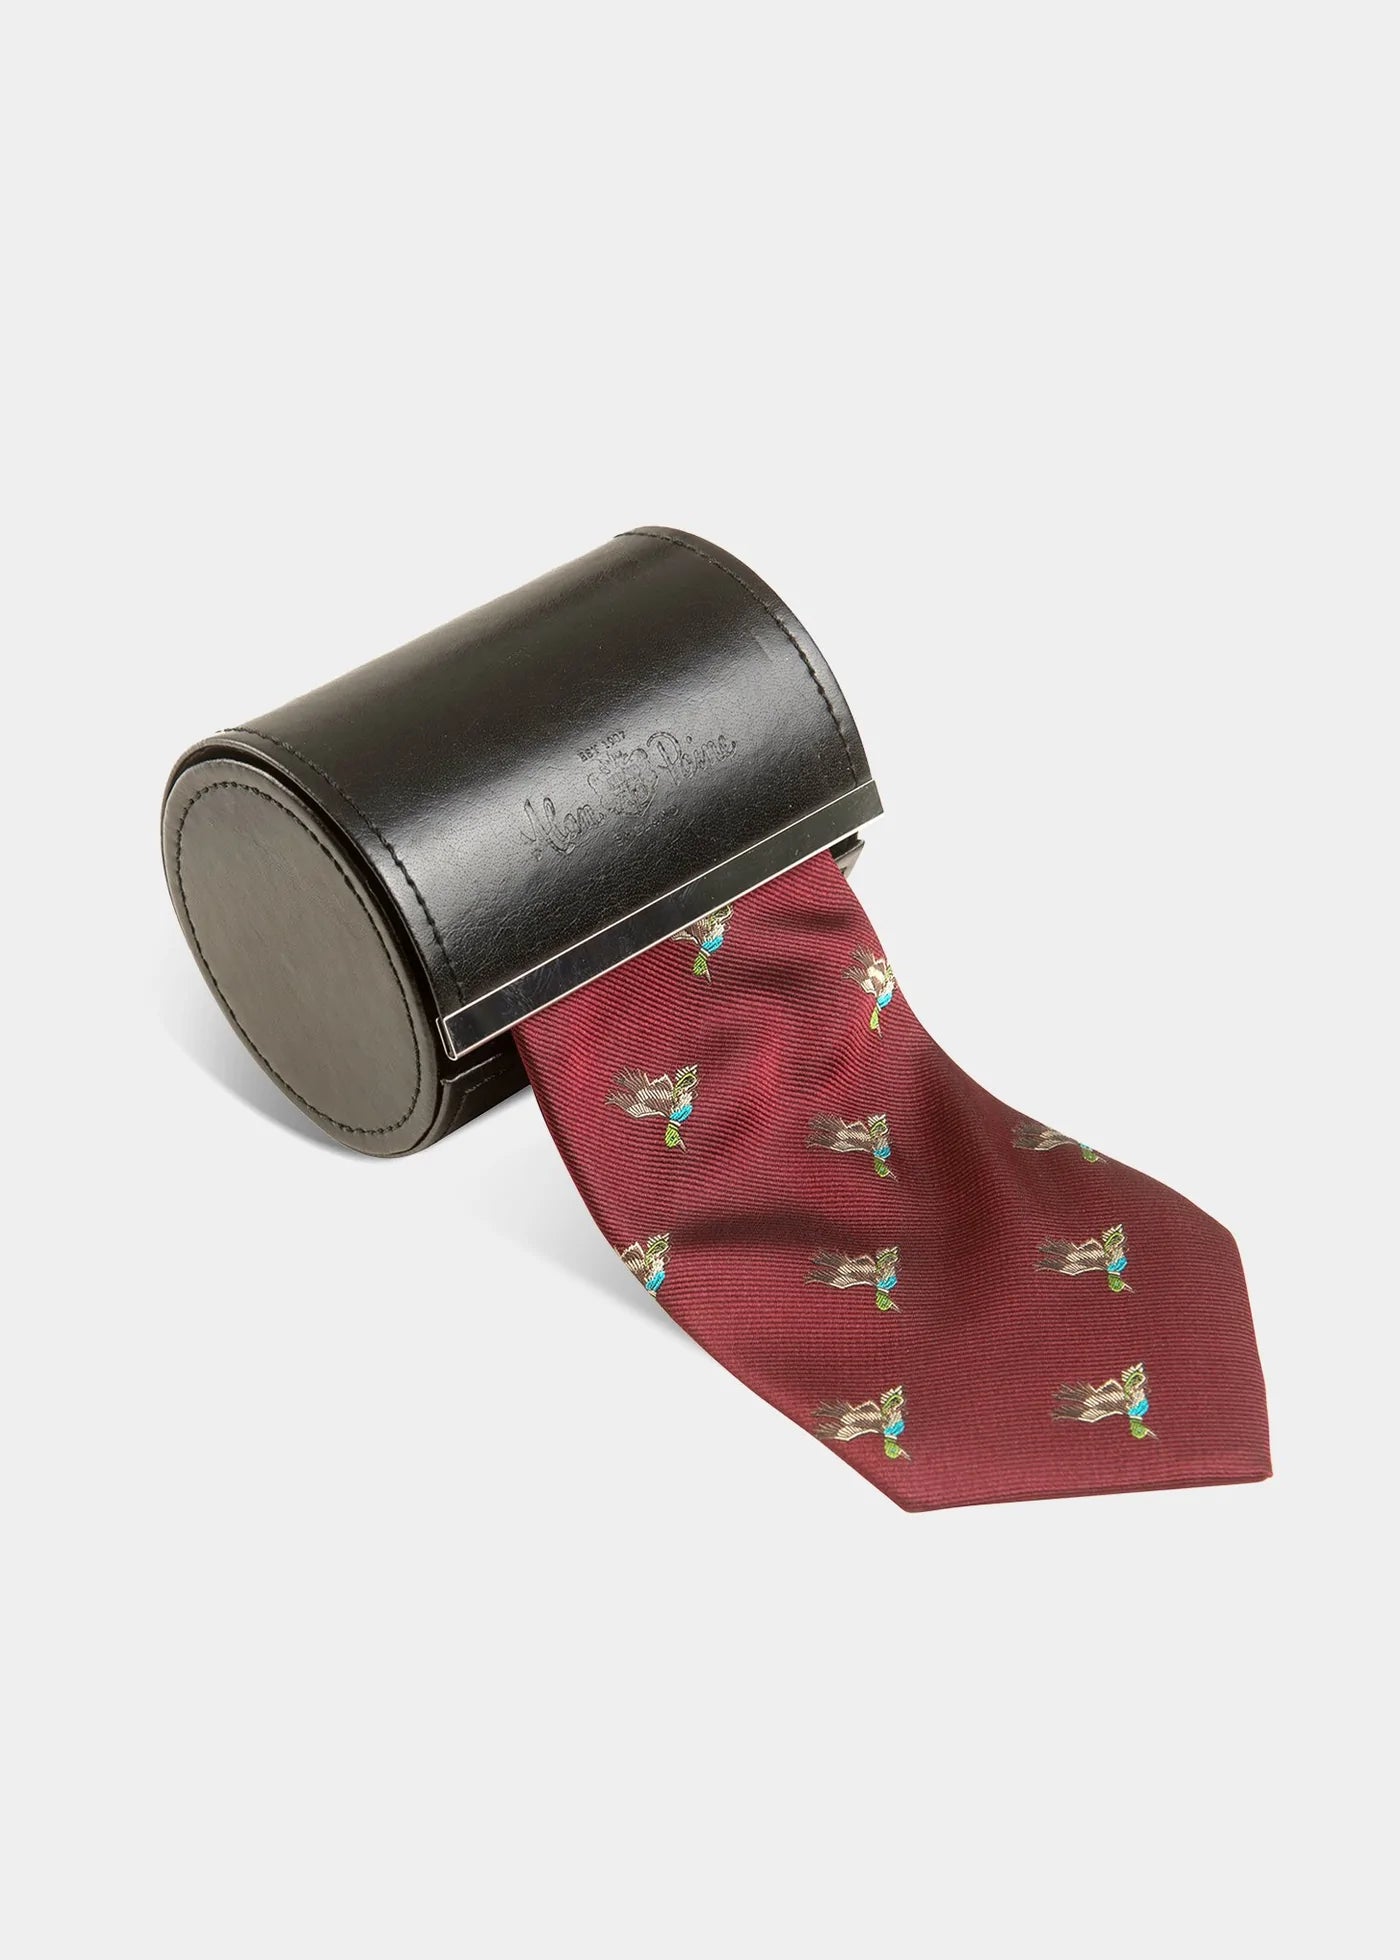 Ripon Silk Country Tie for Men with Duck Design